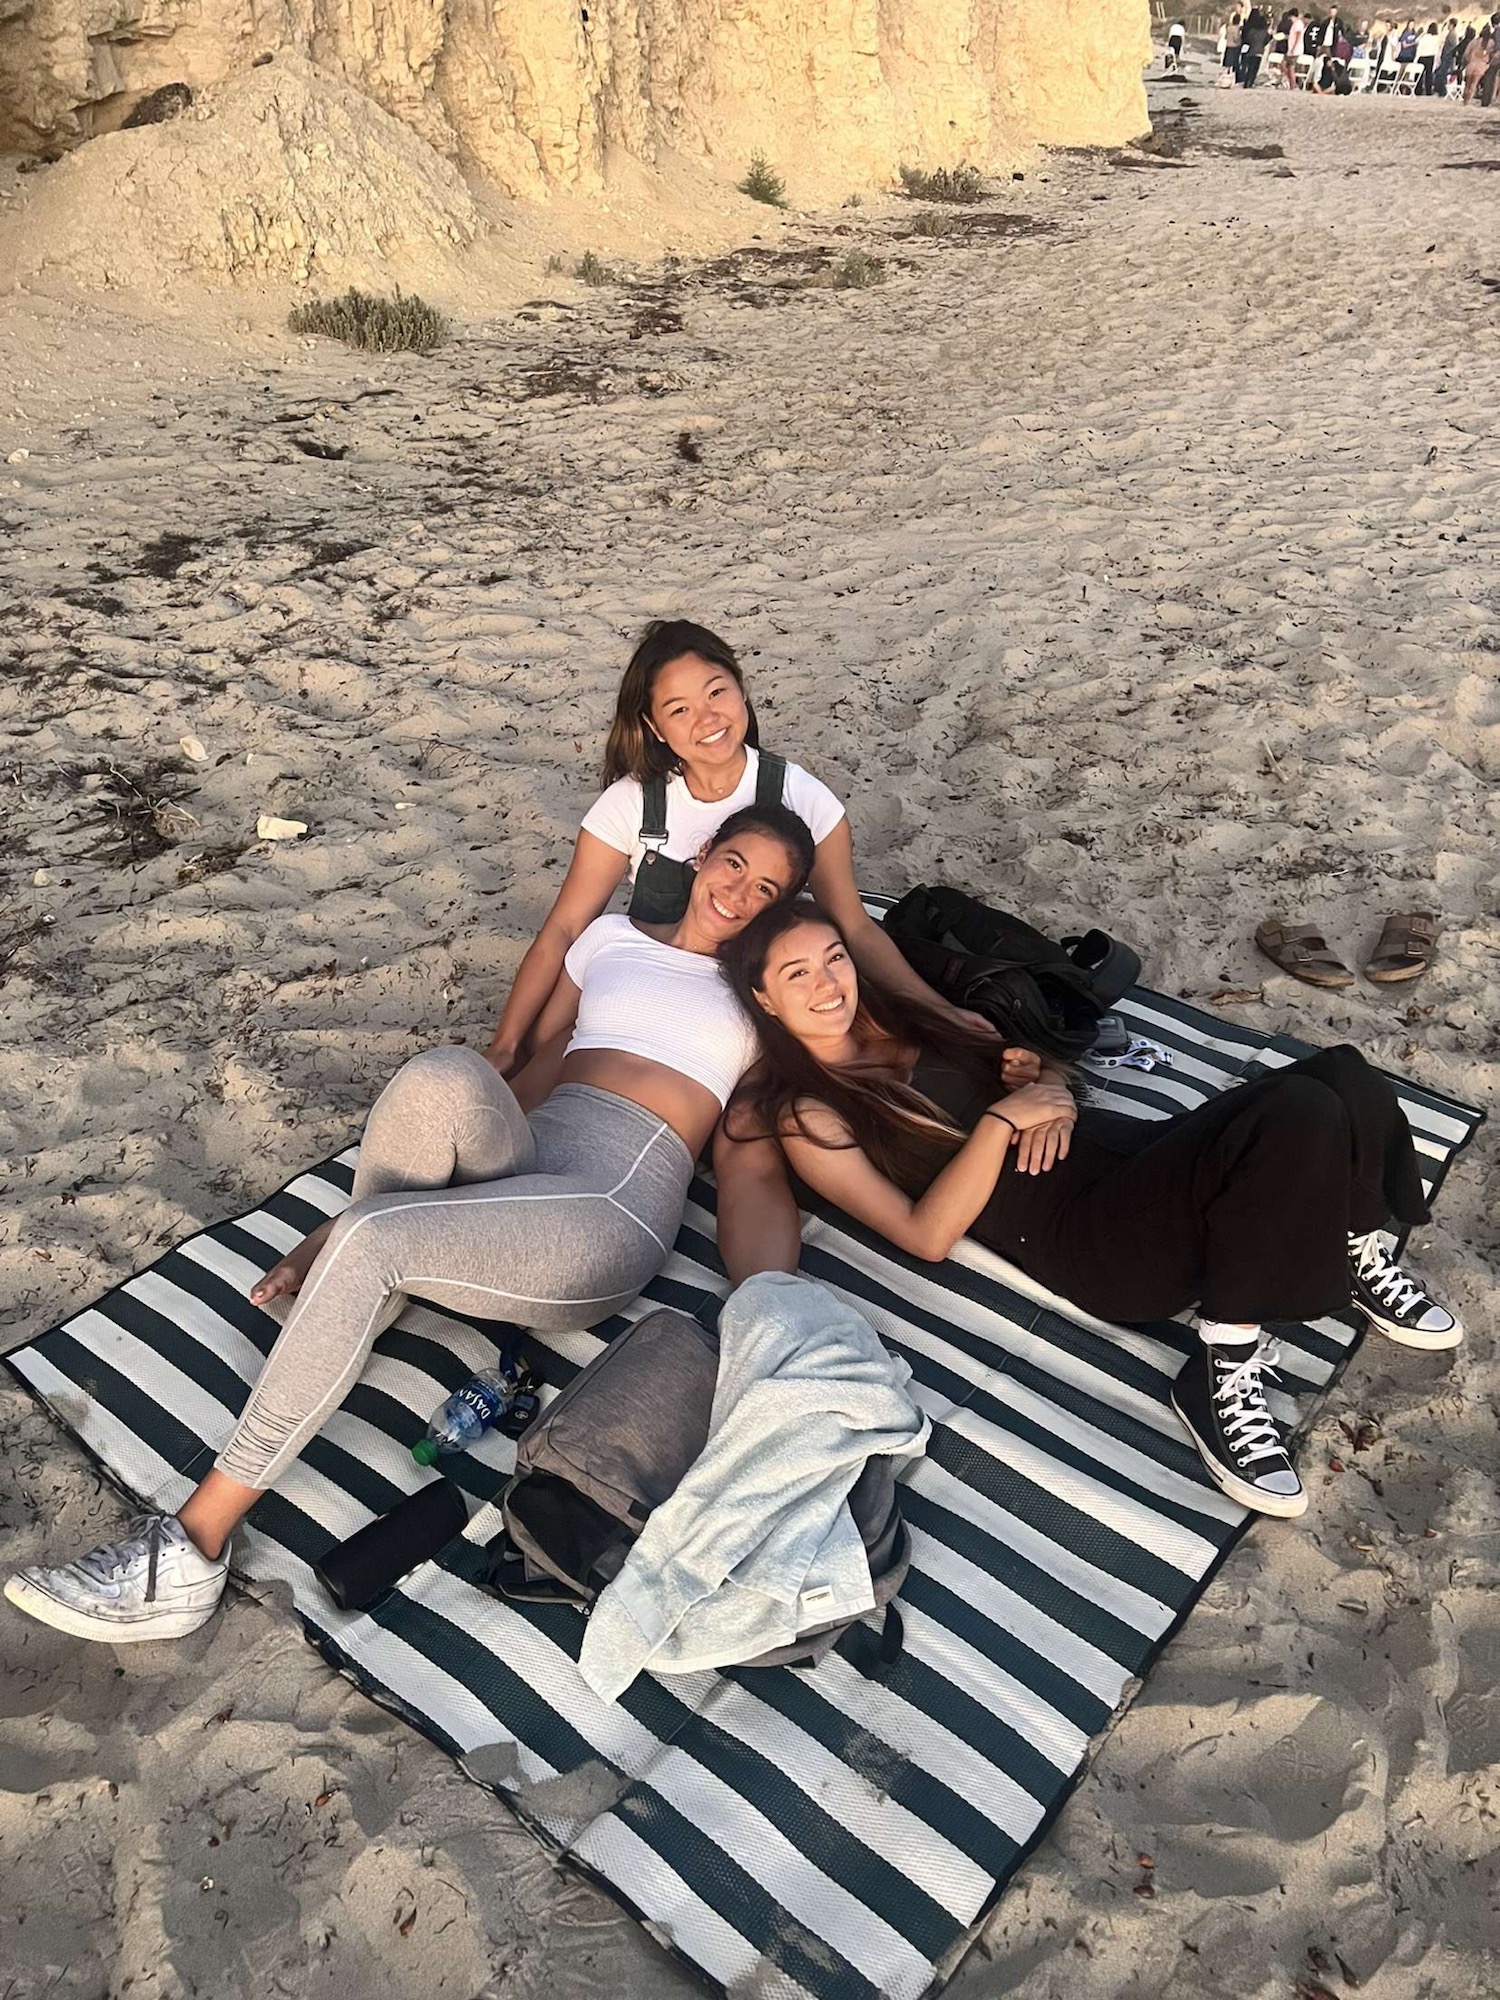 three students lying on each other on a beach towel